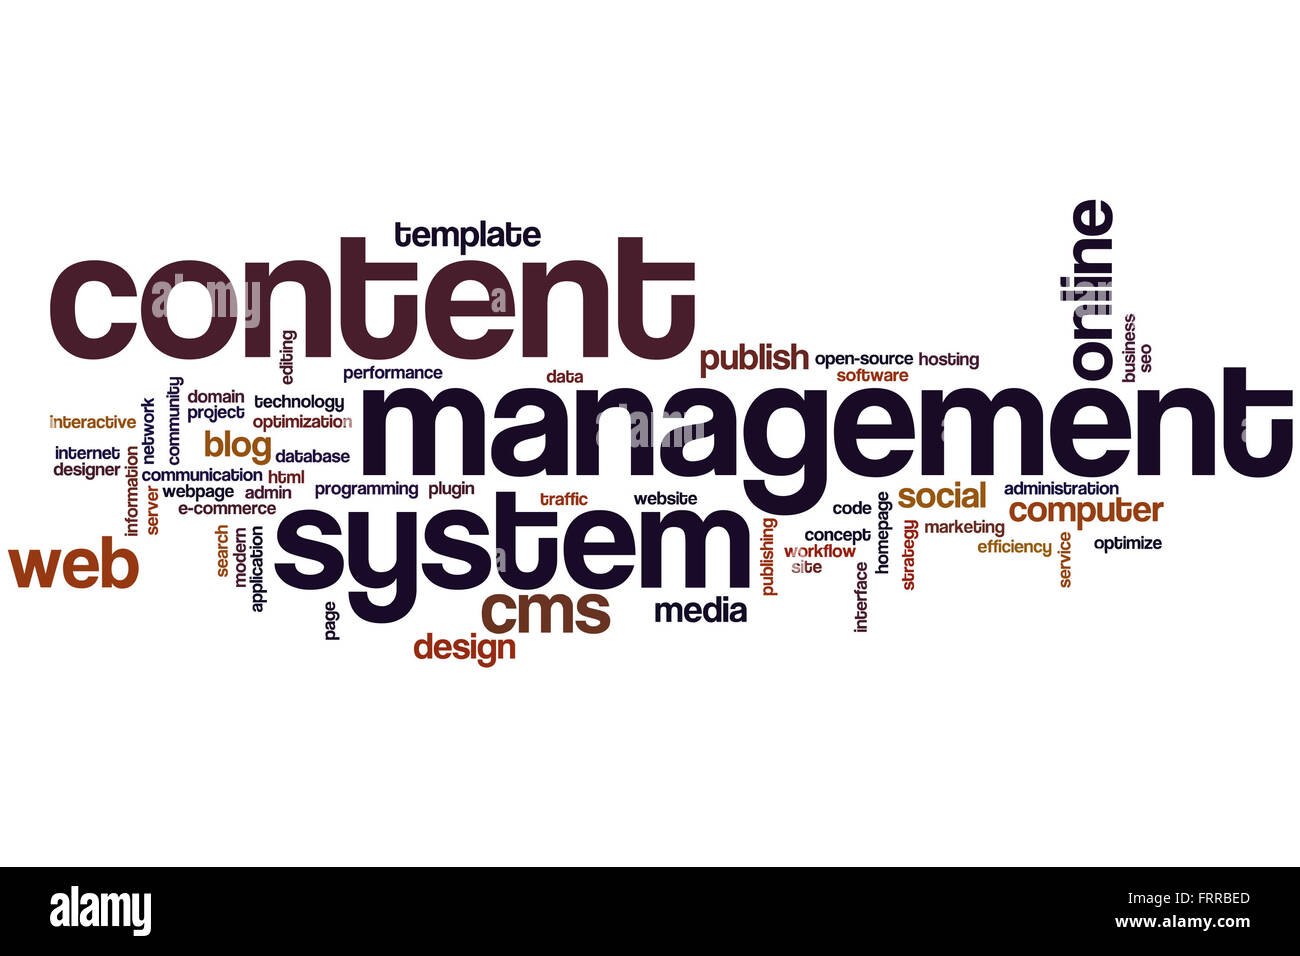 Content management system concept word cloud background Stock Photo